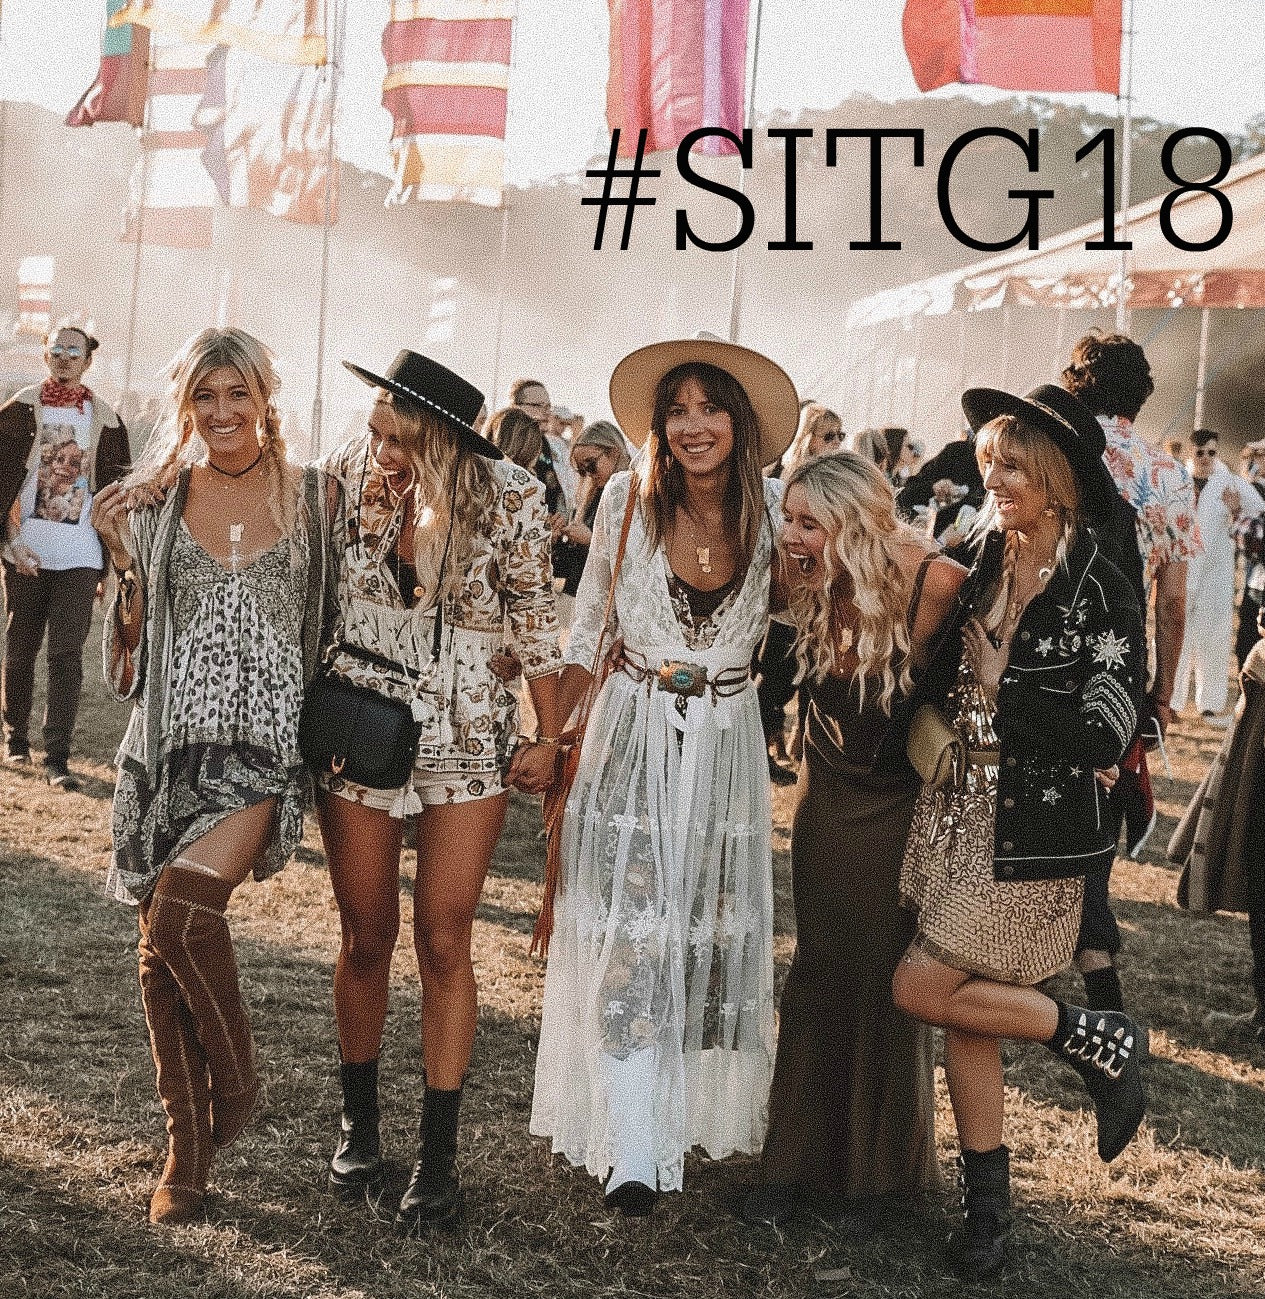 A Weekend of Boho Festival Outfits with Spell & The Gyspy Collective